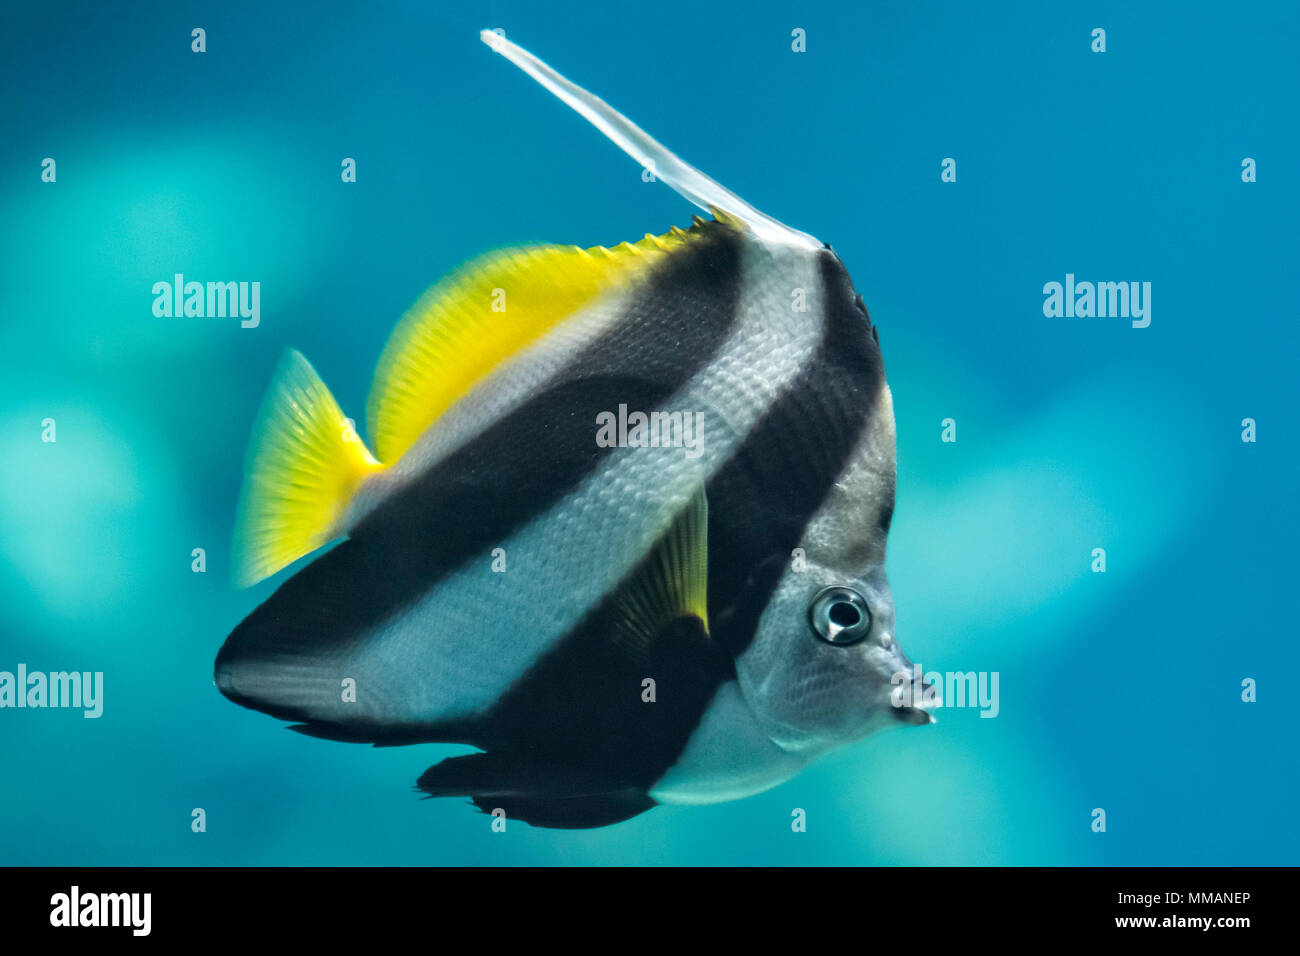 A colorful Schooling Bannerfish. Scientific Name: Heniochus diphreutes. Also known as False moorish idol, Pennantfish, Pennant Butterfly fish. Stock Photo